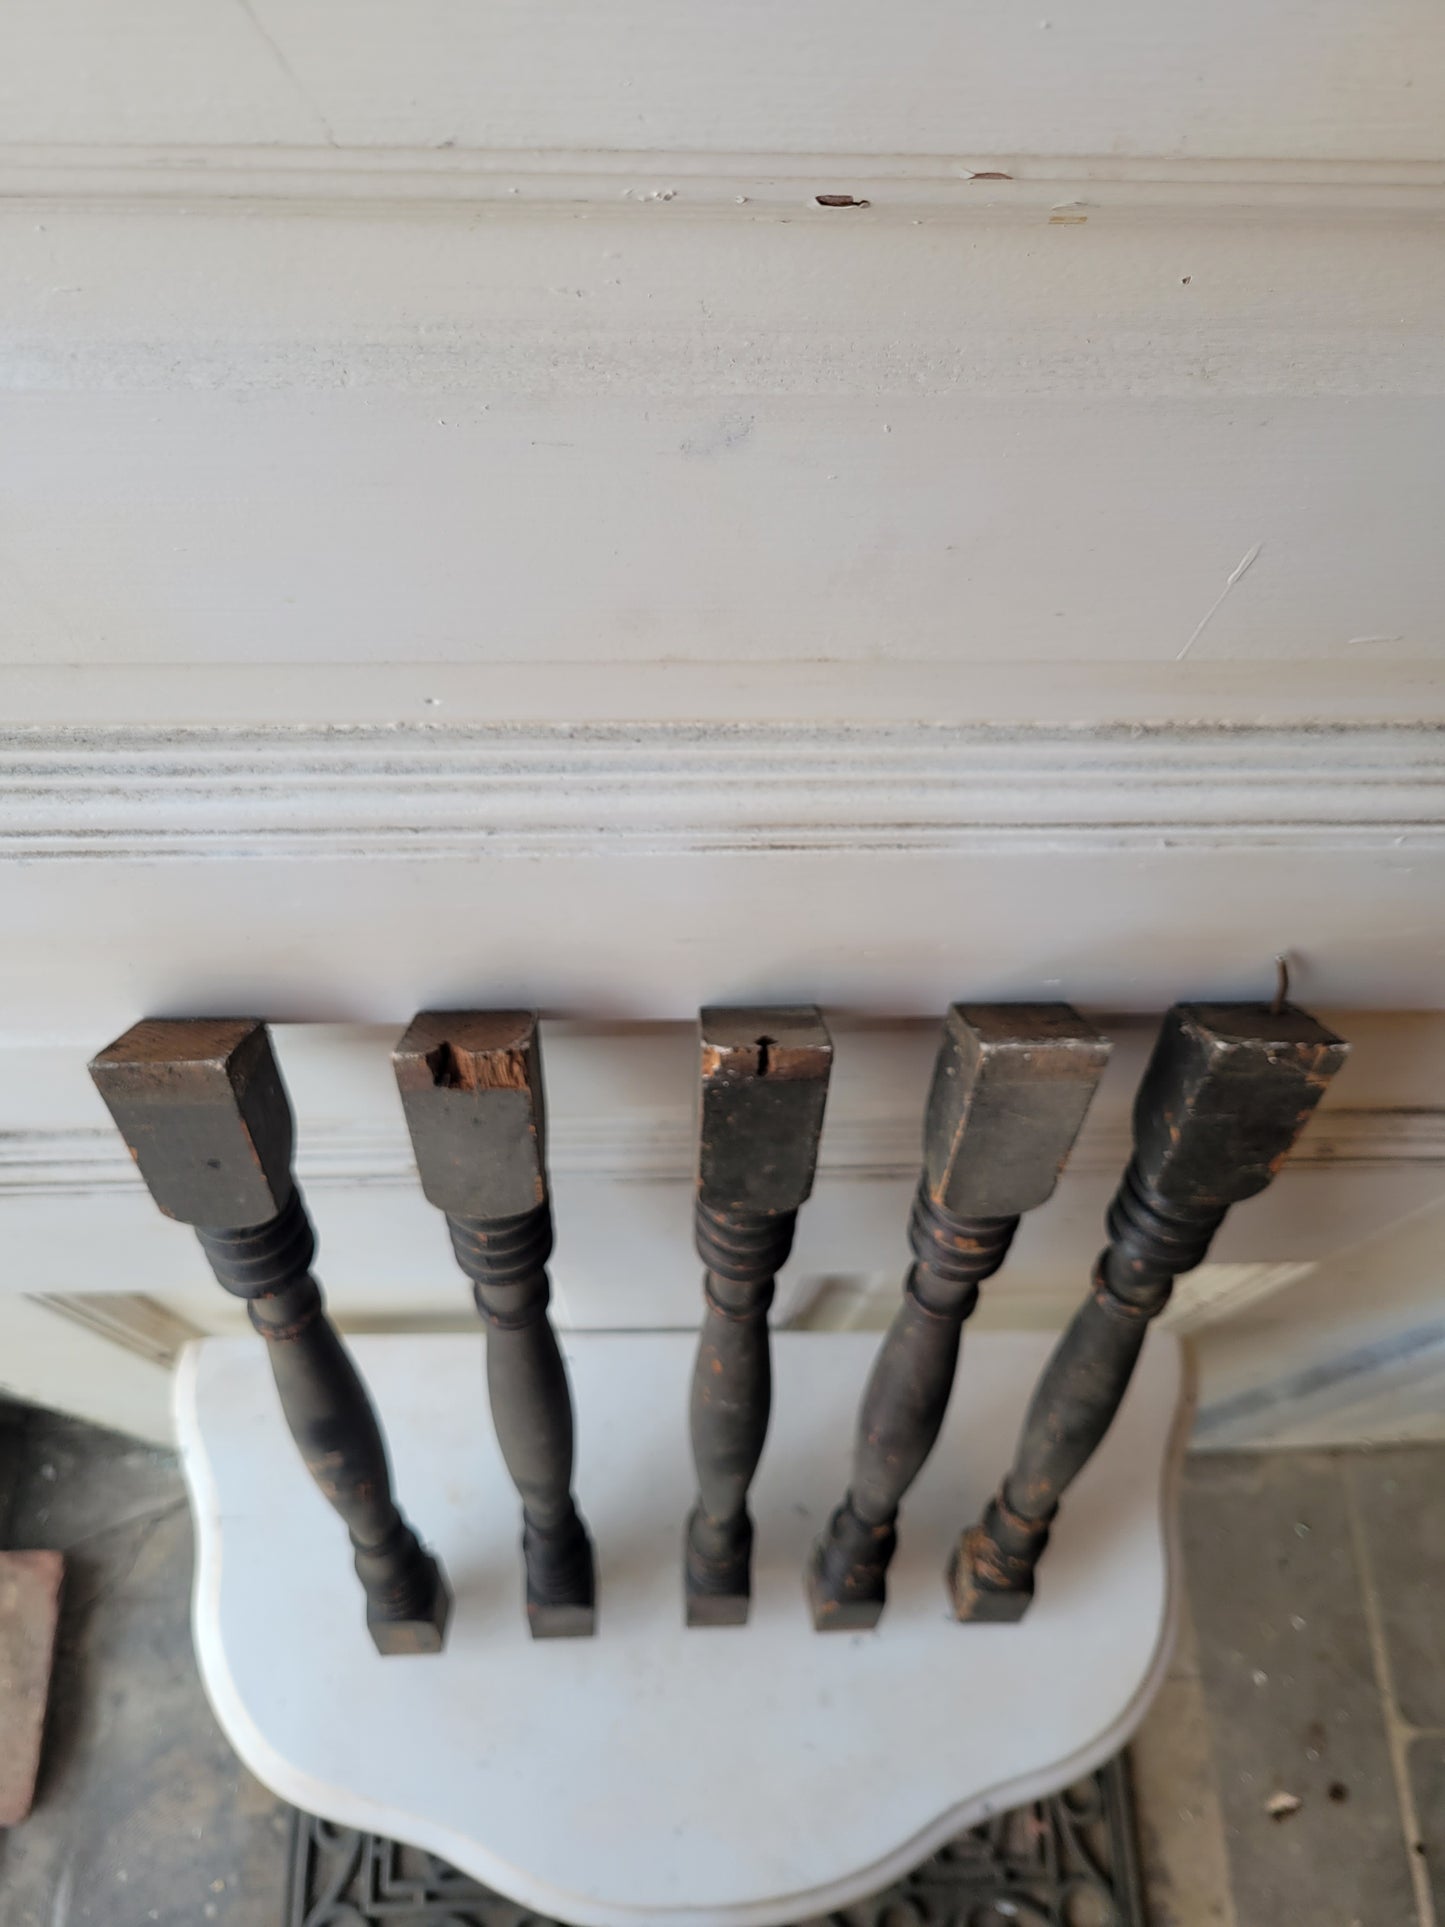 Set of 5 Salvaged Staircase Spindles, Antique Victorian Stair Spindles #012801